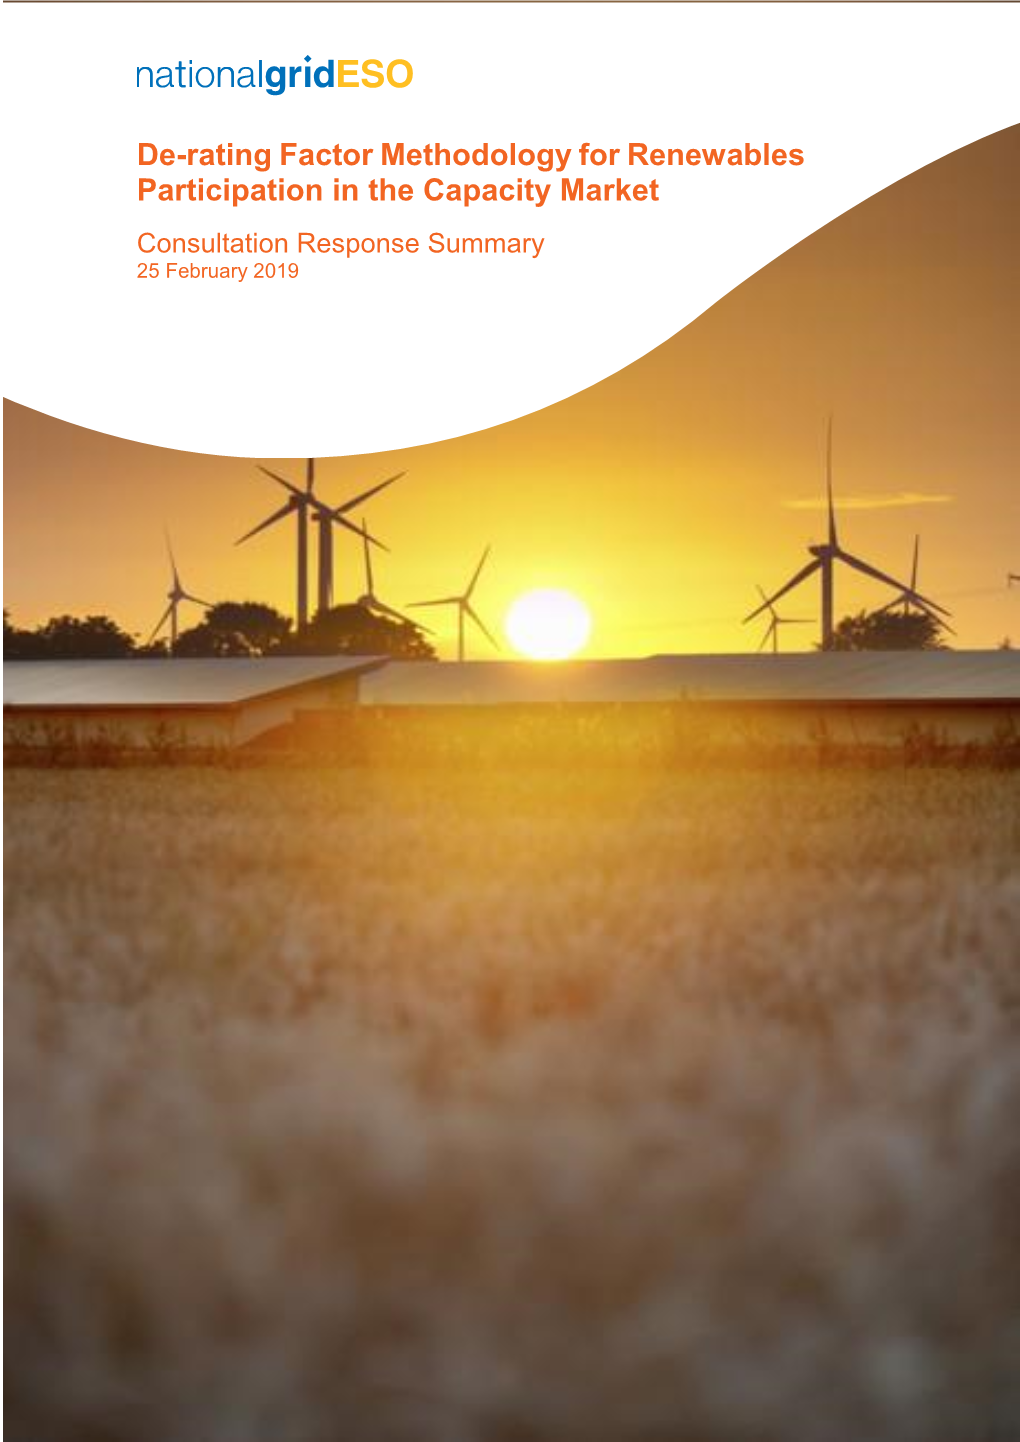 (2019), 'De-Rating Factor Methodology for Renewables Participation in the Capacity Market'